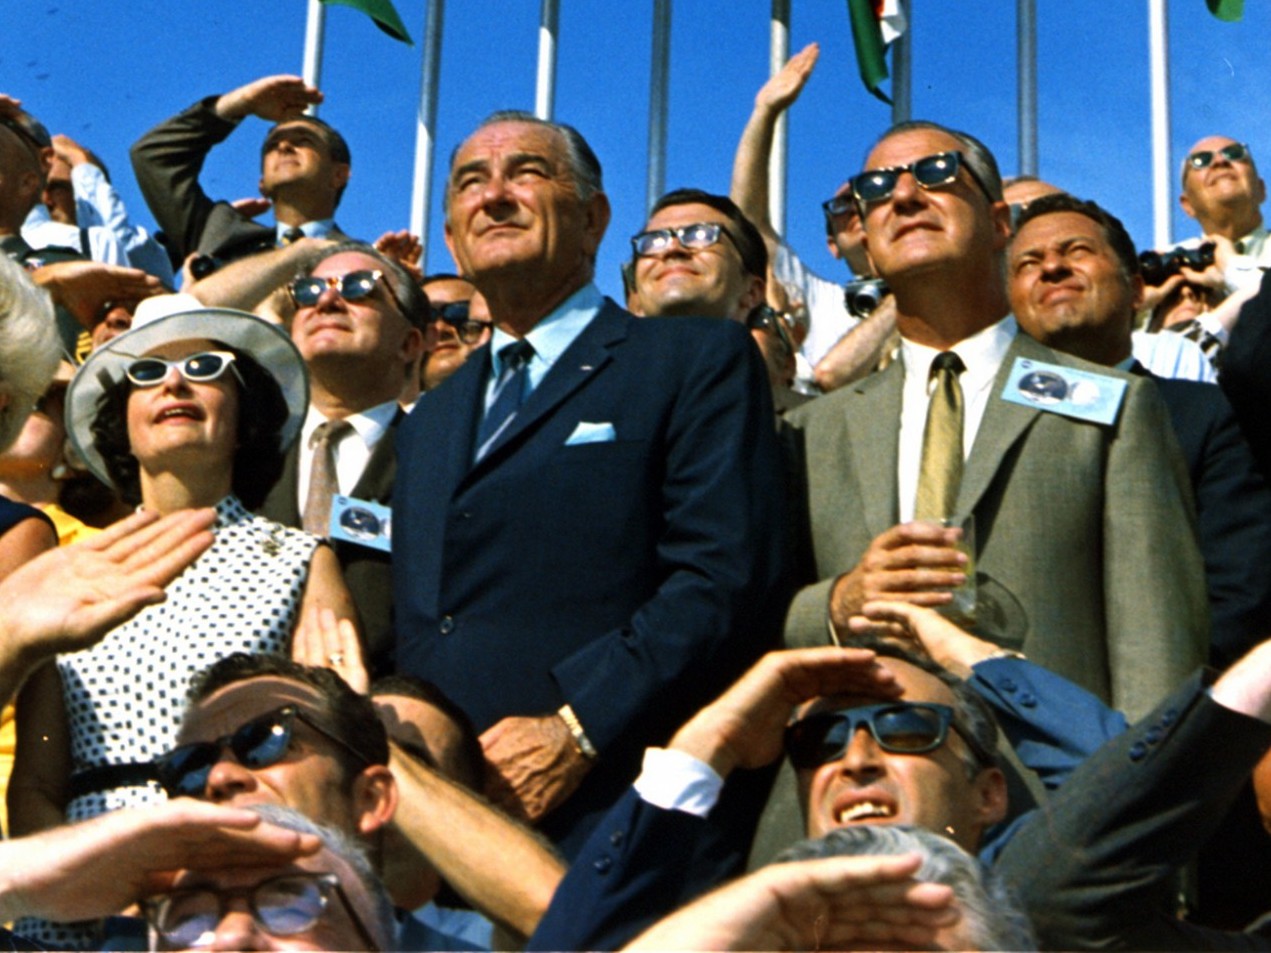 President Johnson and crowd watch return of Apollo 11. Source: NASA The Commons, Flickr - Public Domain